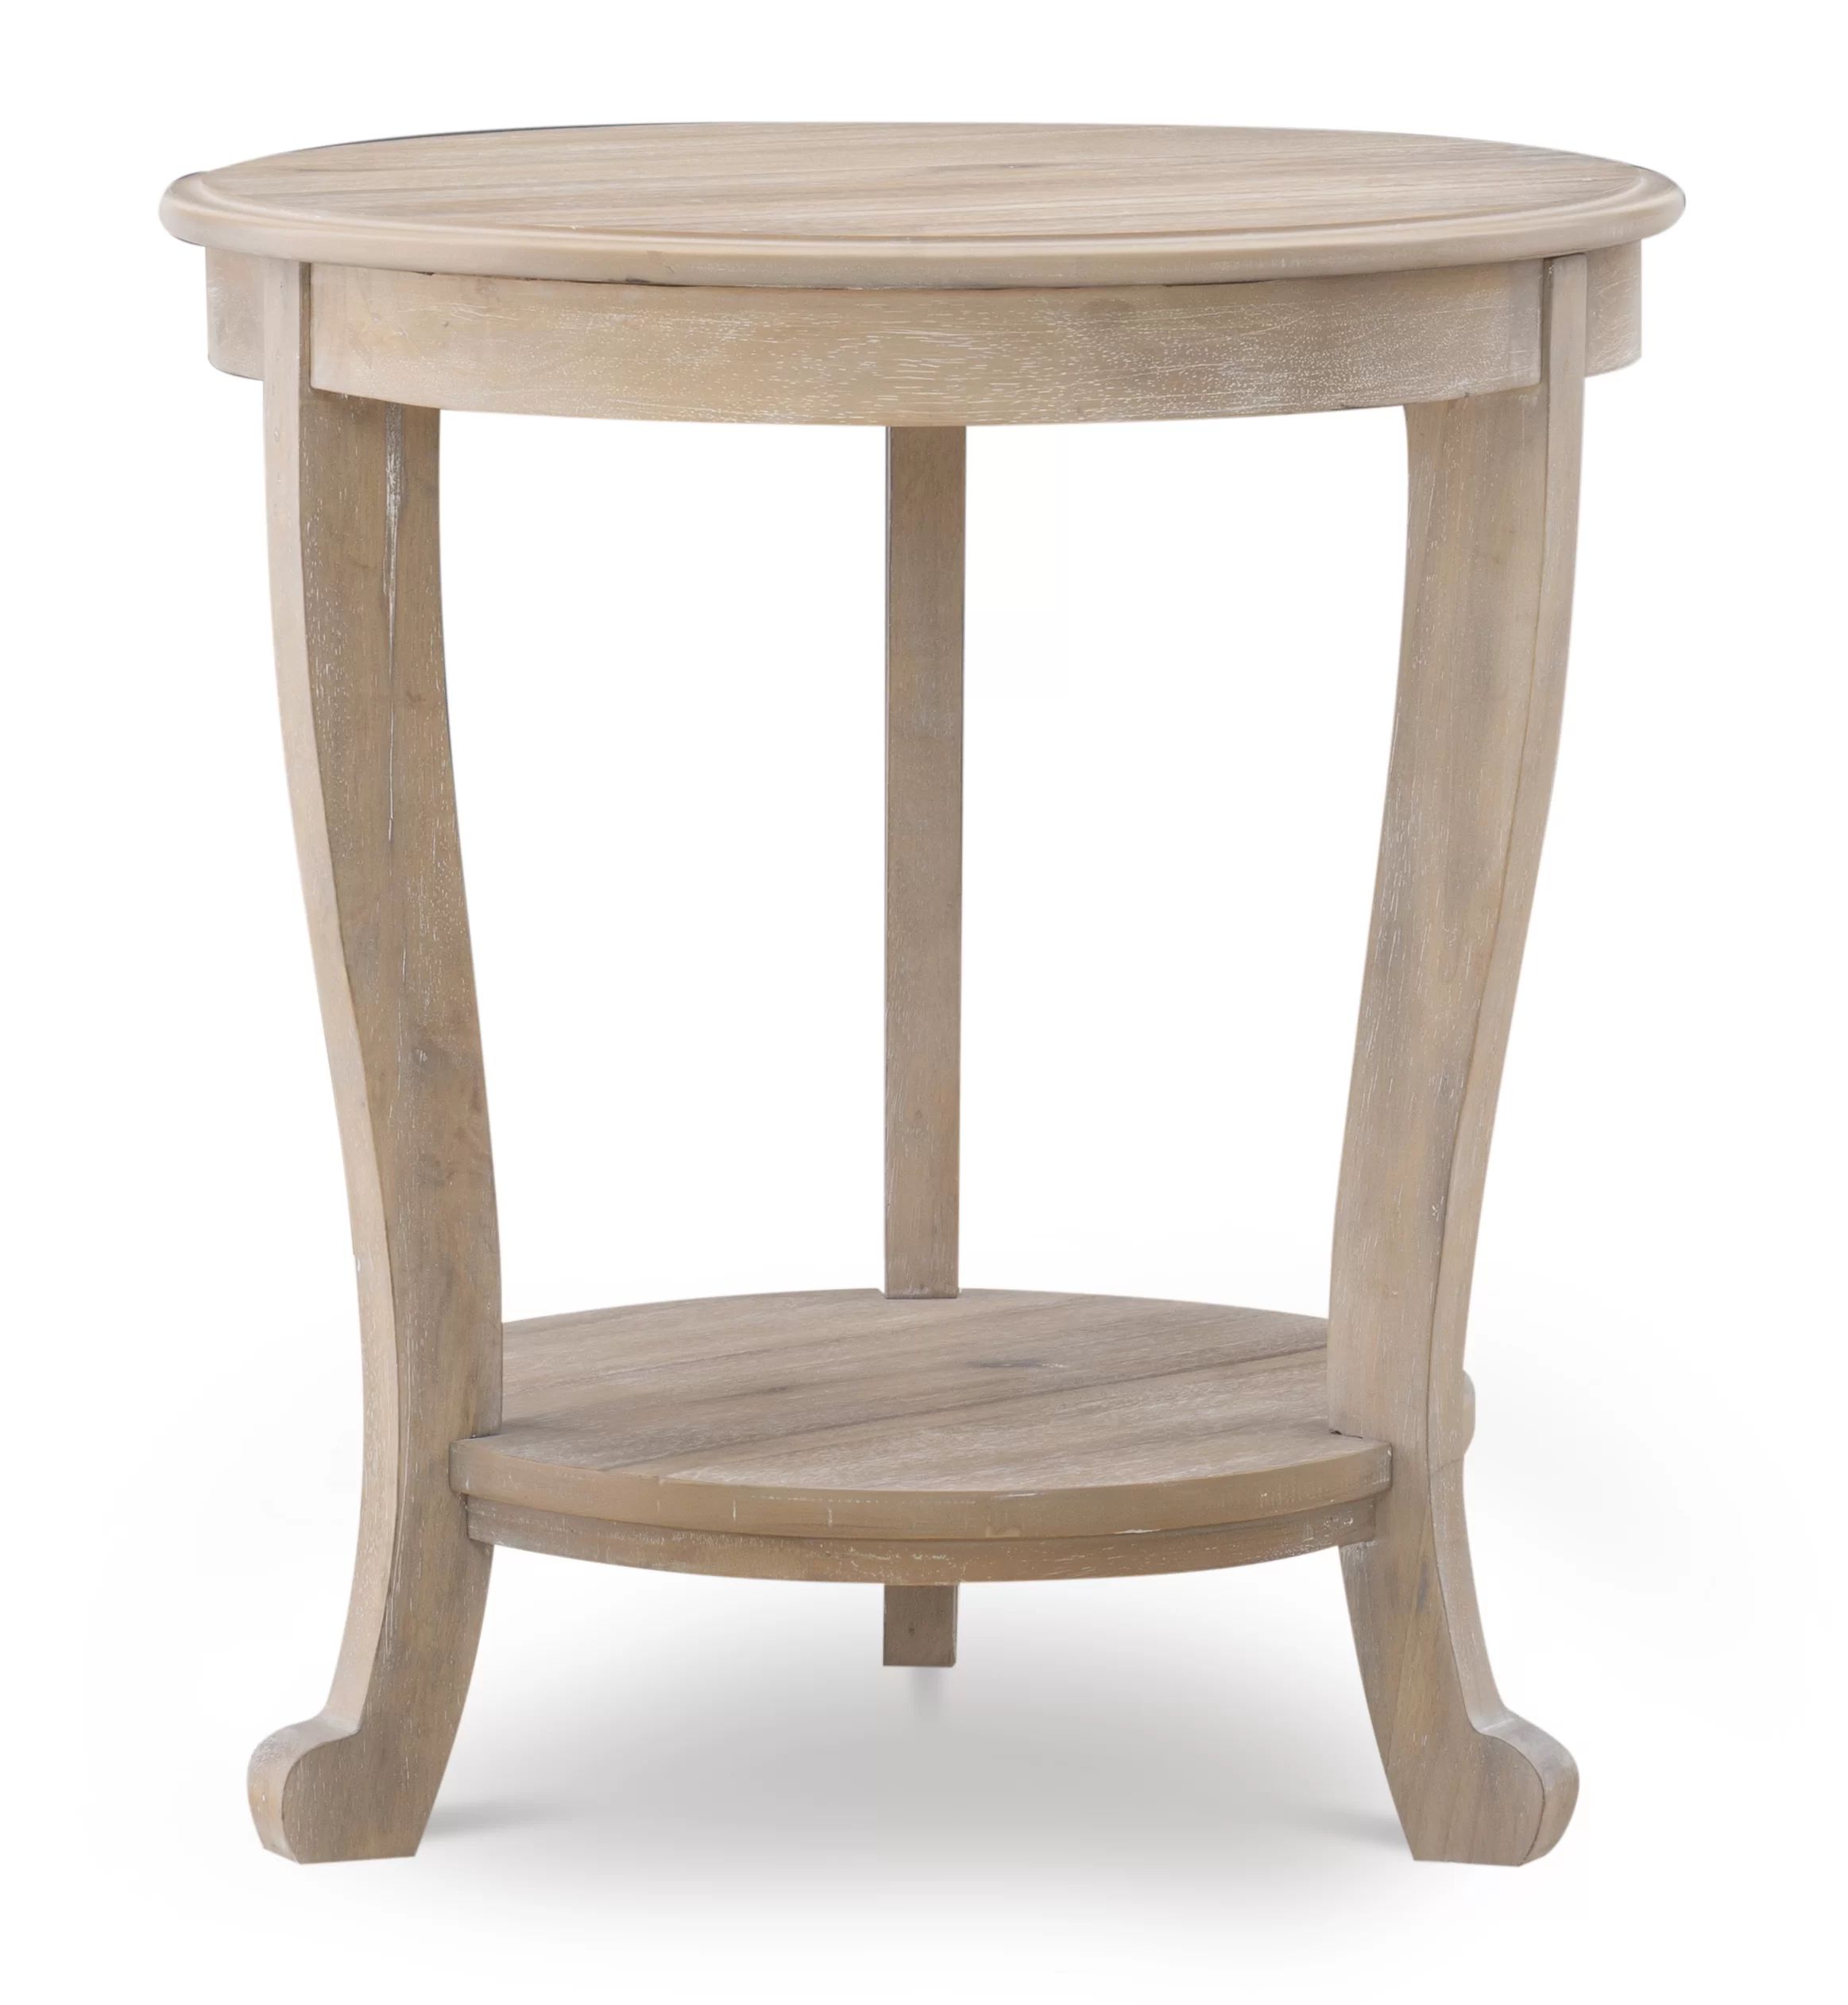 Lincolnton 3 Legs End Table with Storage | Wayfair North America